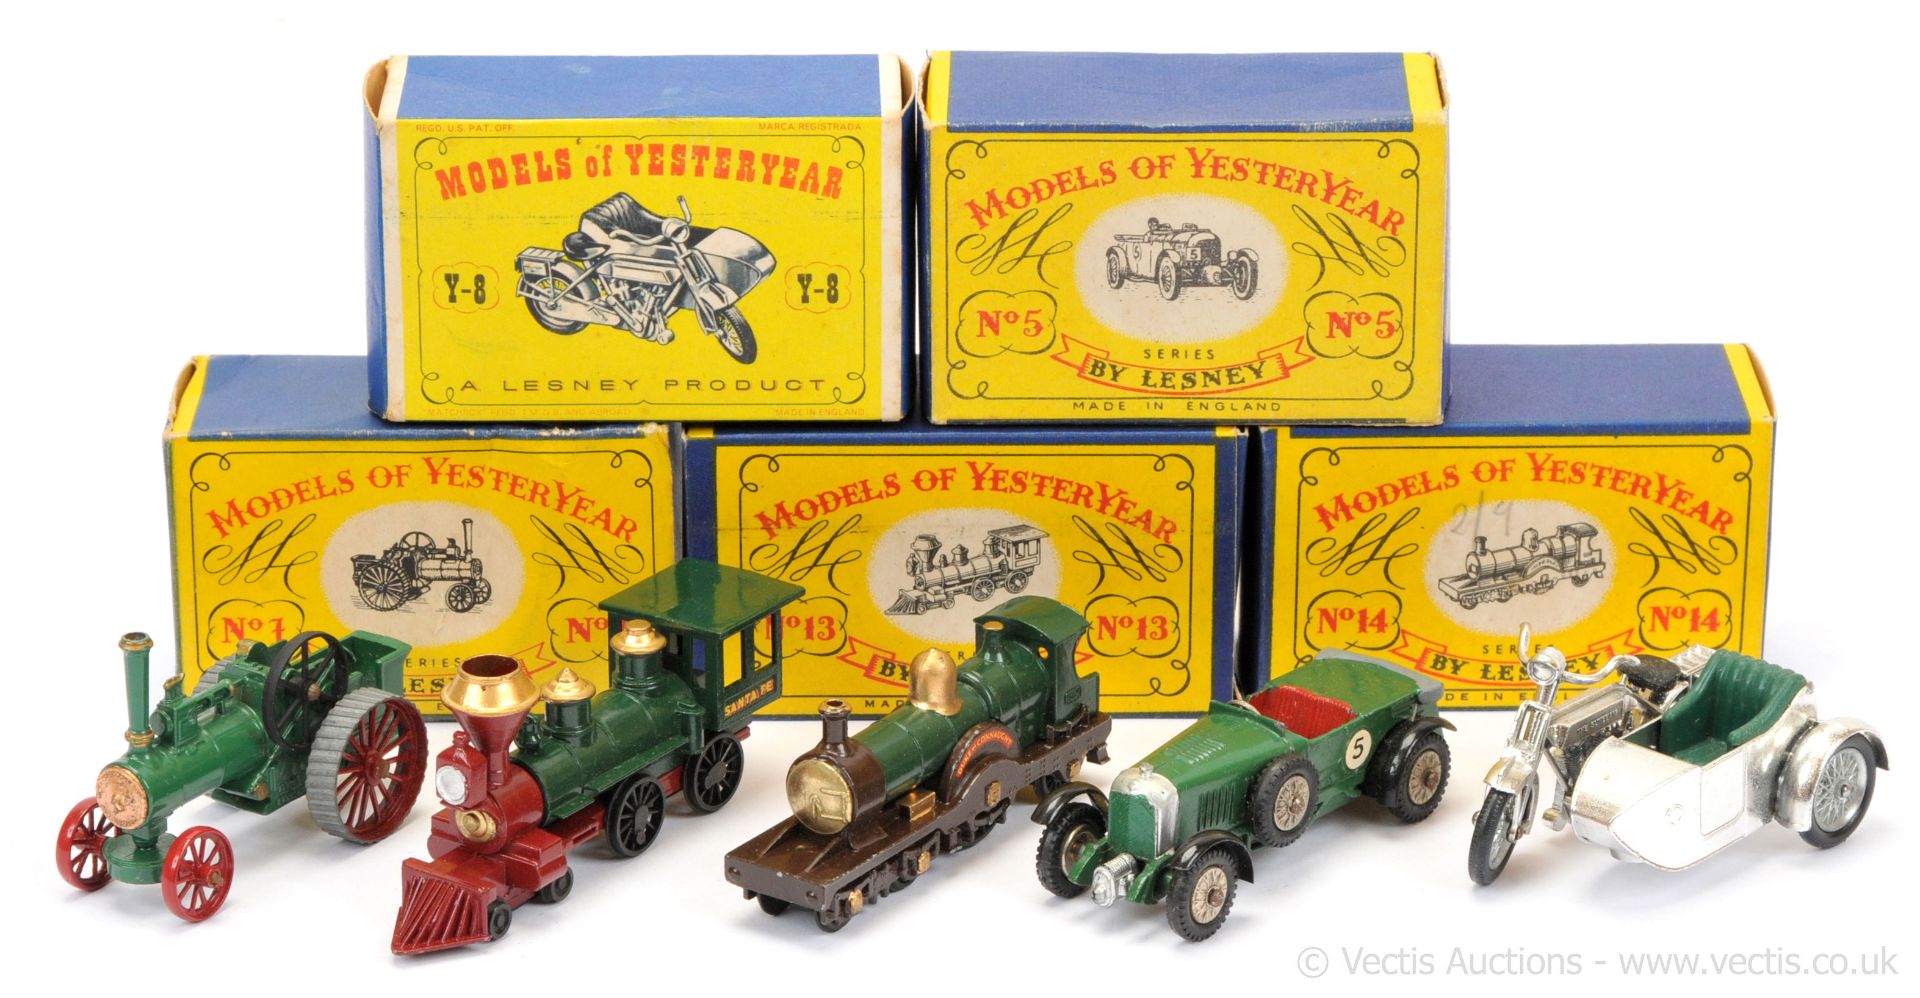 GRP inc Matchbox Models of Yesteryear (1) Y1